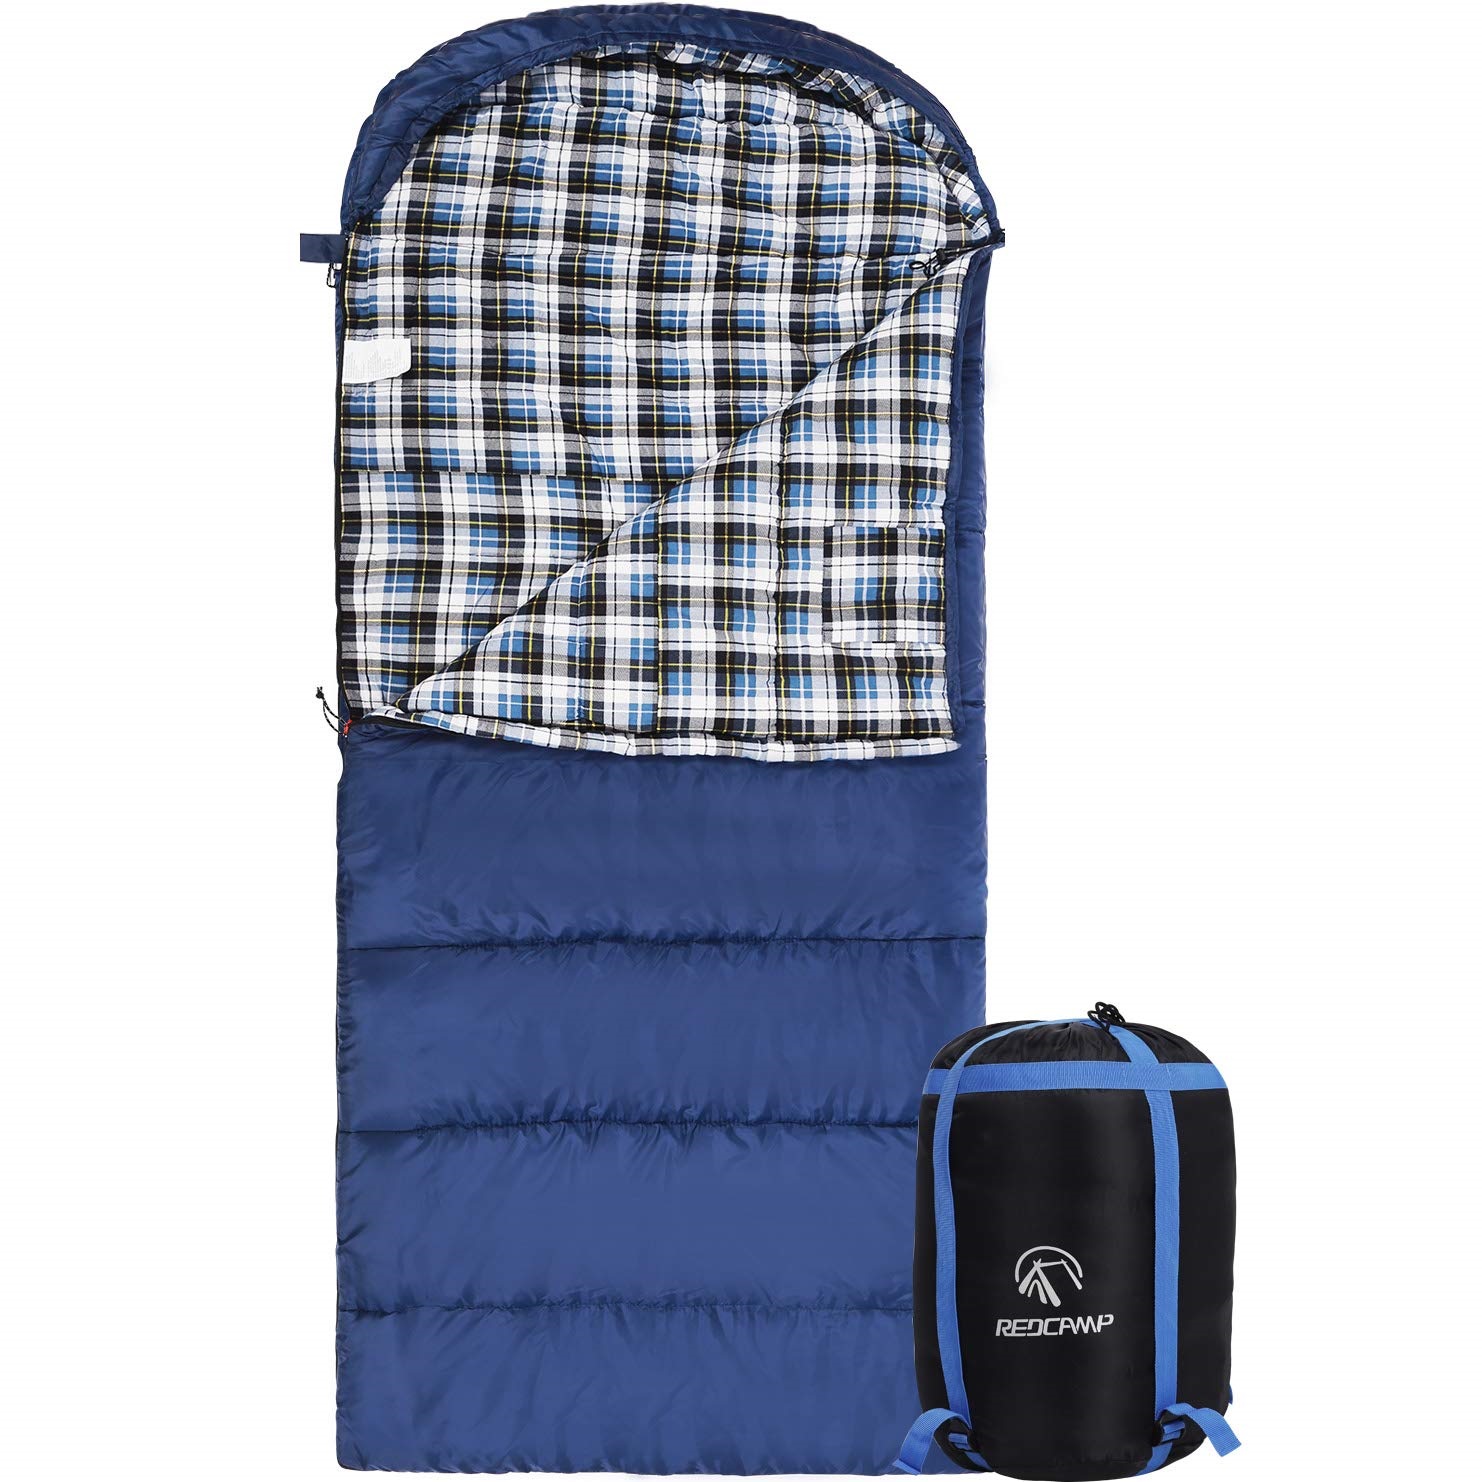 REDCAMP Cotton Flannel Sleeping Bag review